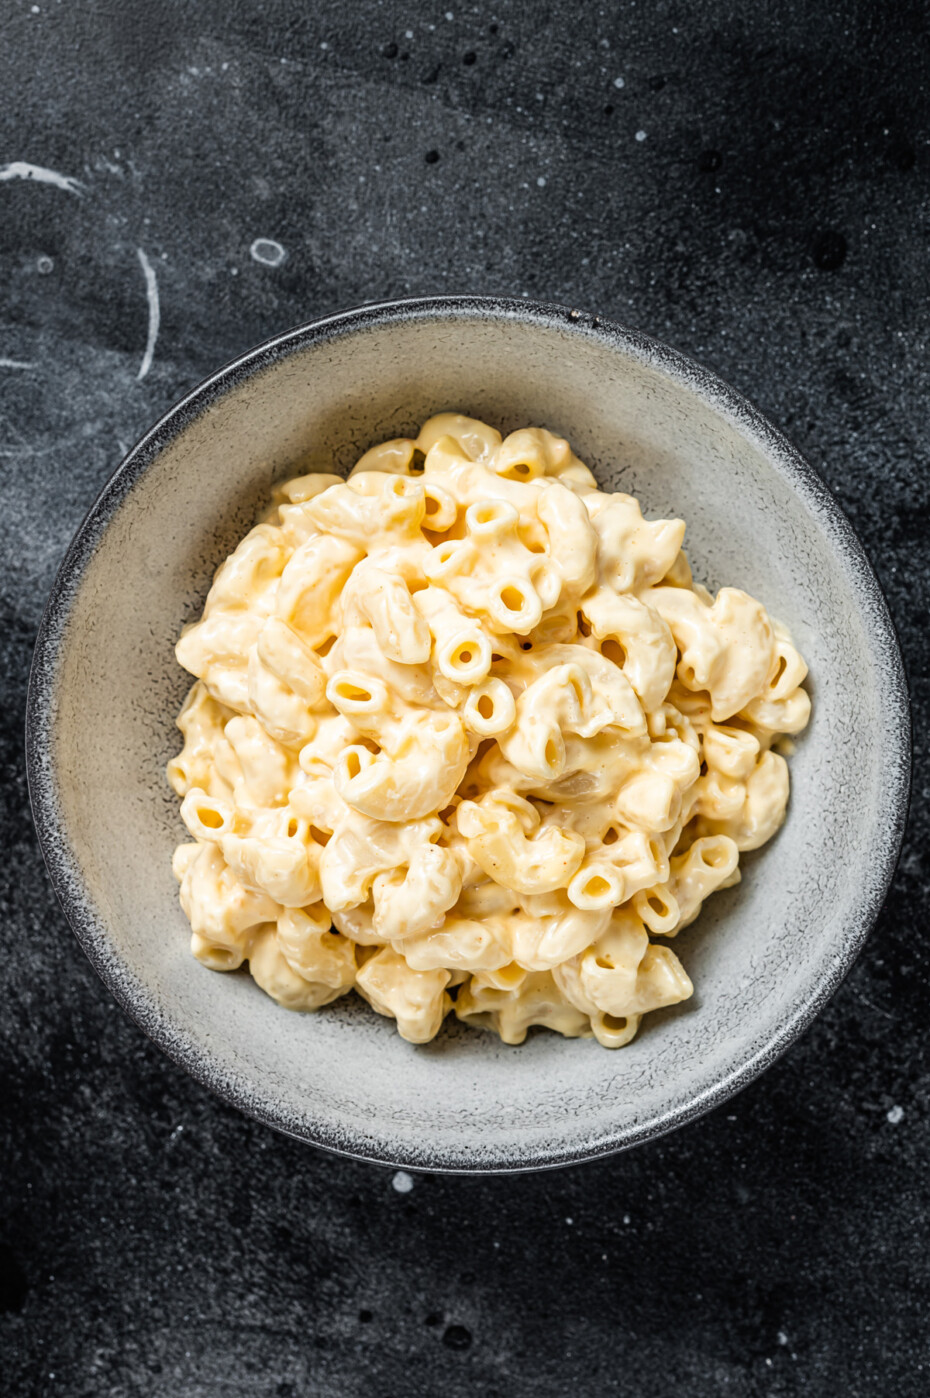 How to Reheat Mac and Cheese